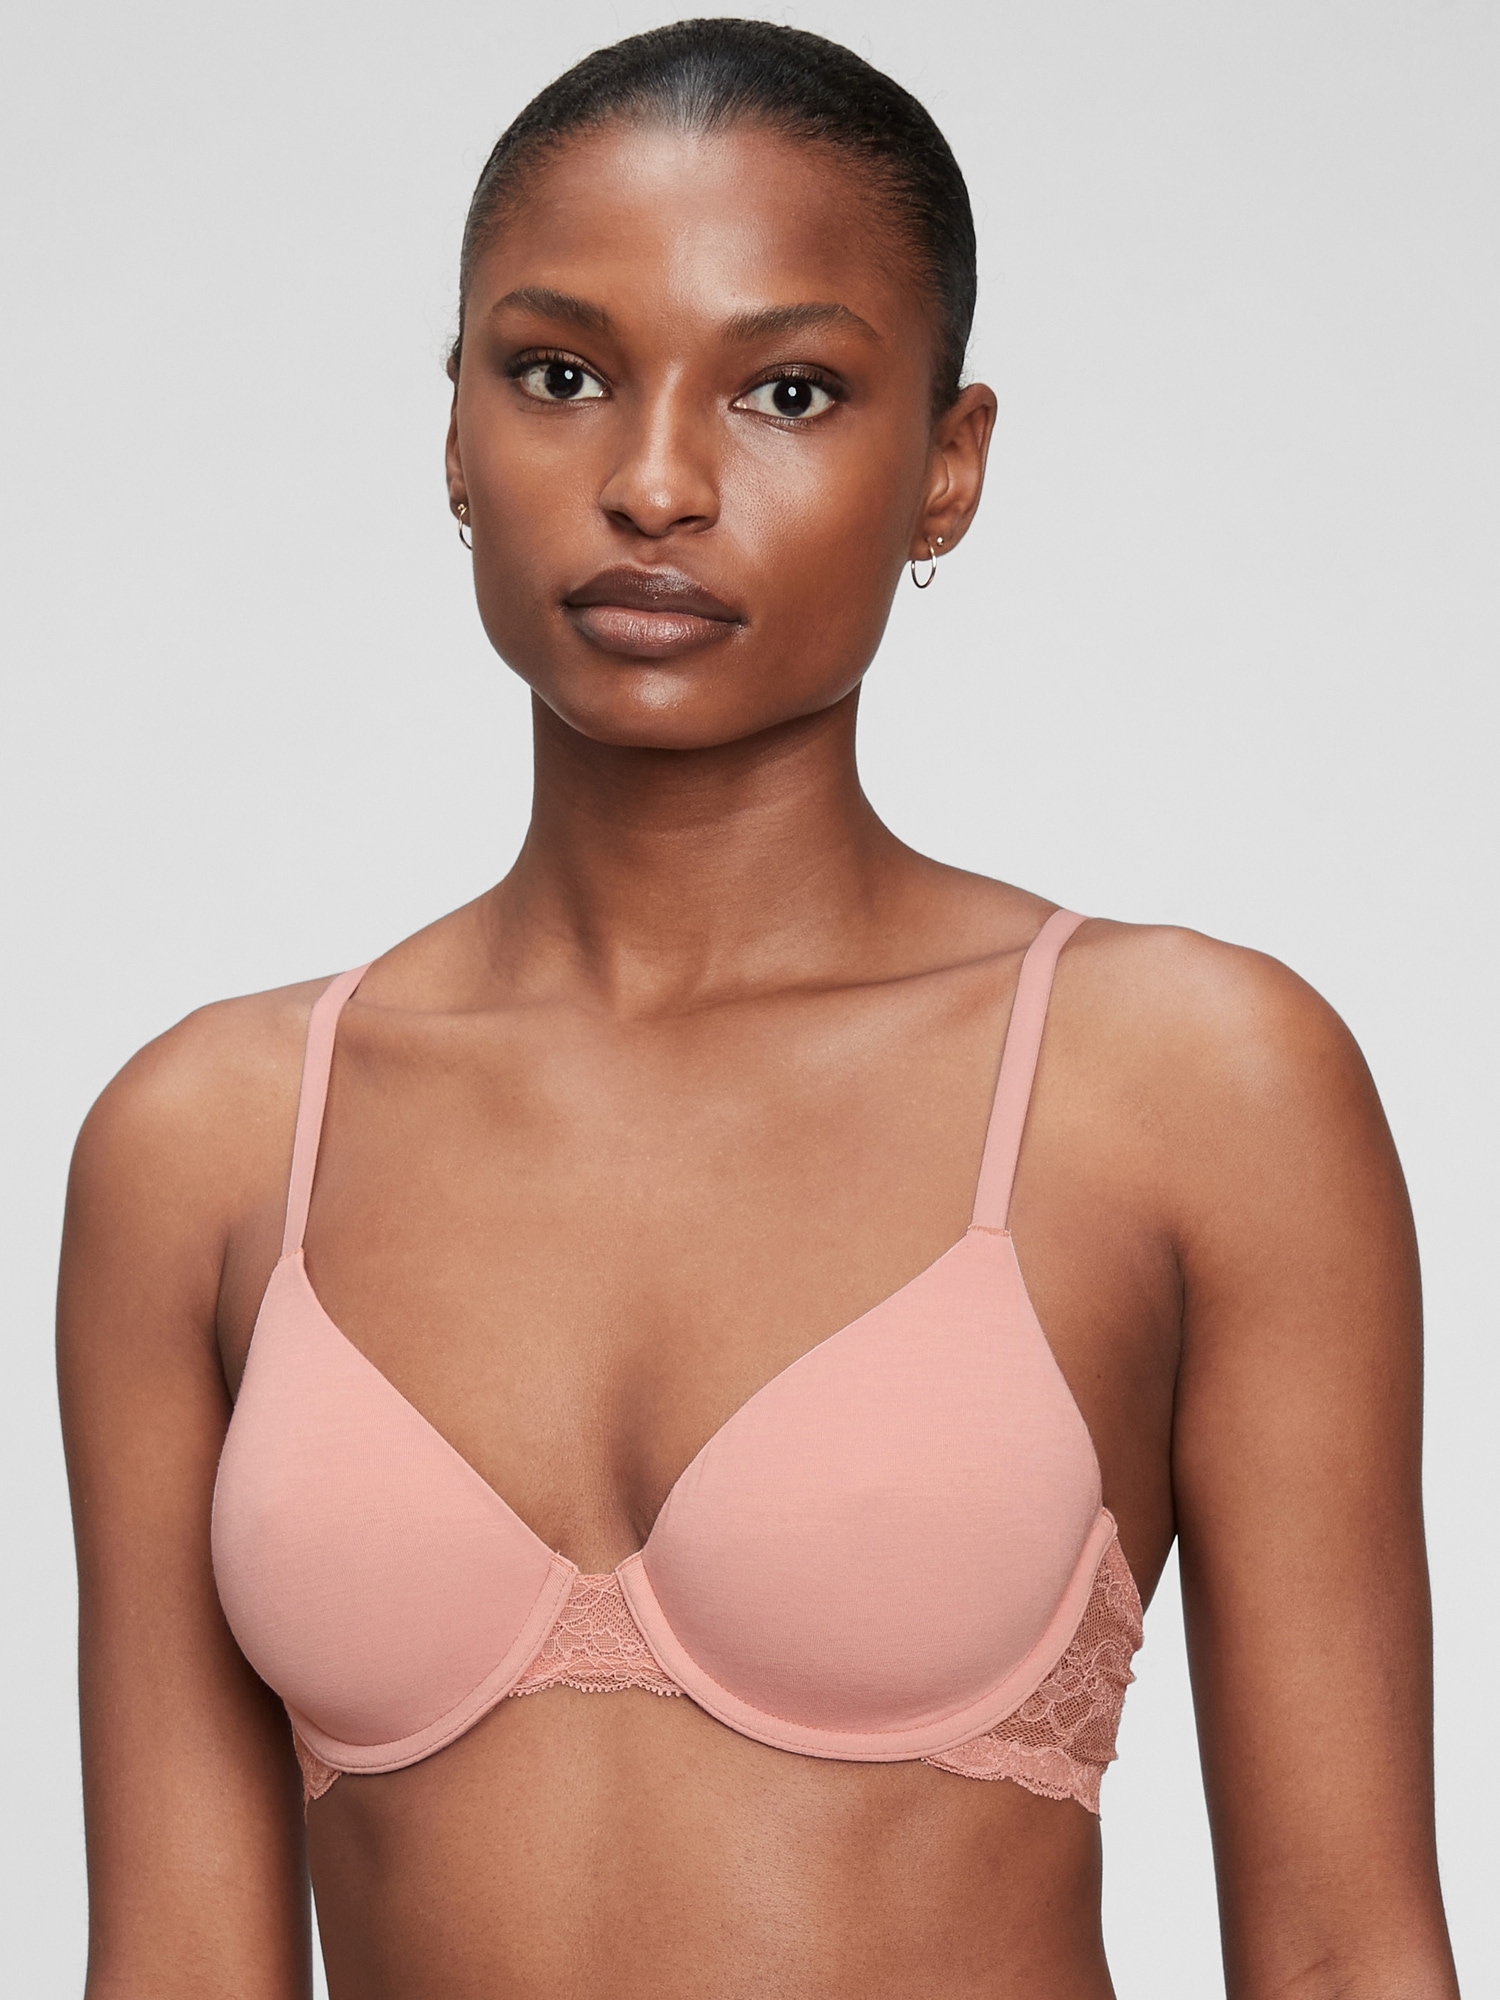 Best Brand New Victoria Secret 32a Bras. Very Comfortable And Has